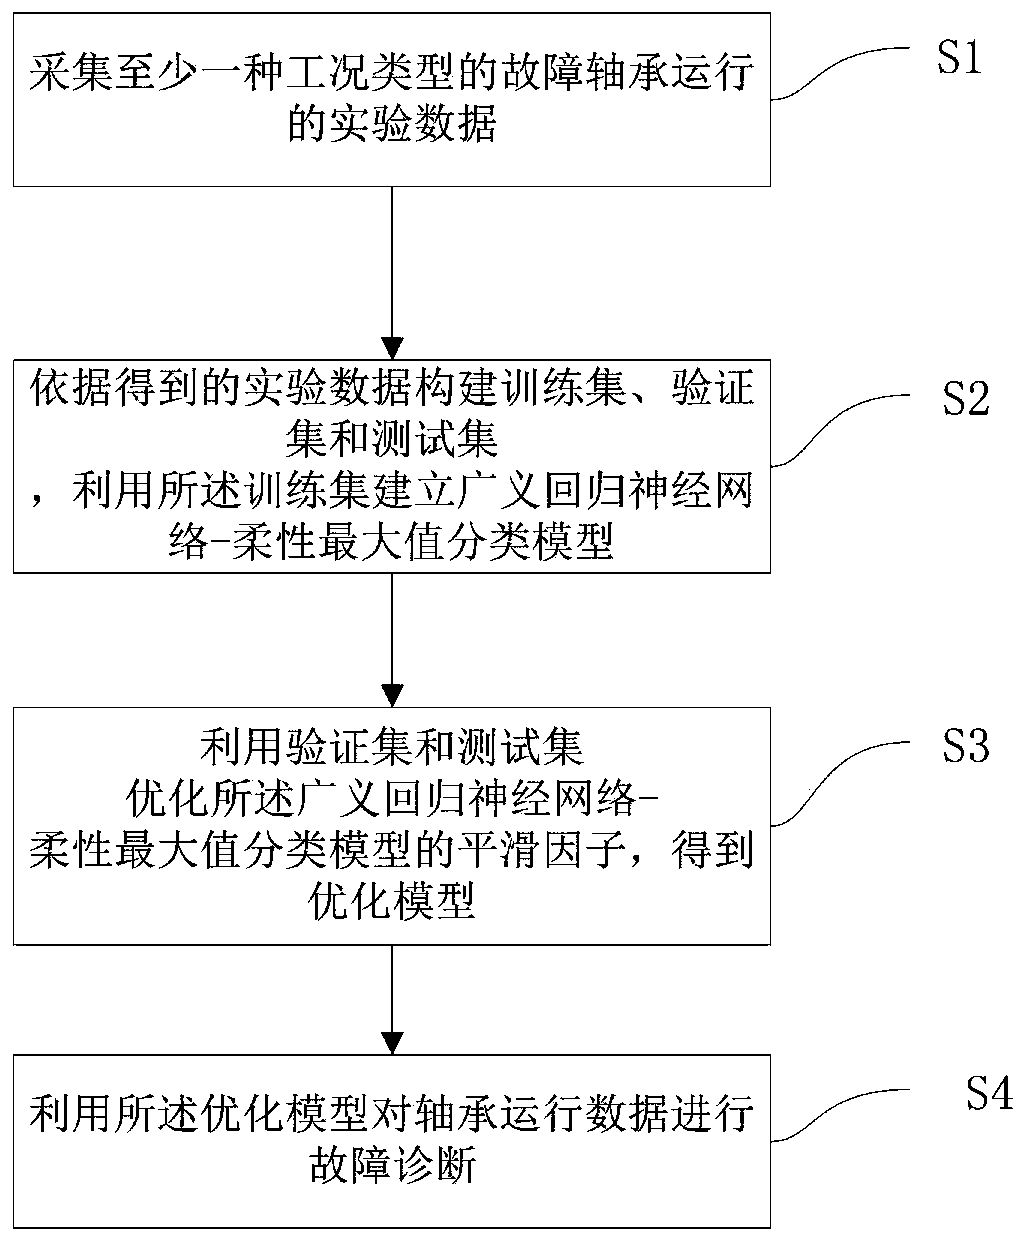 Bearing fault diagnosis method and system